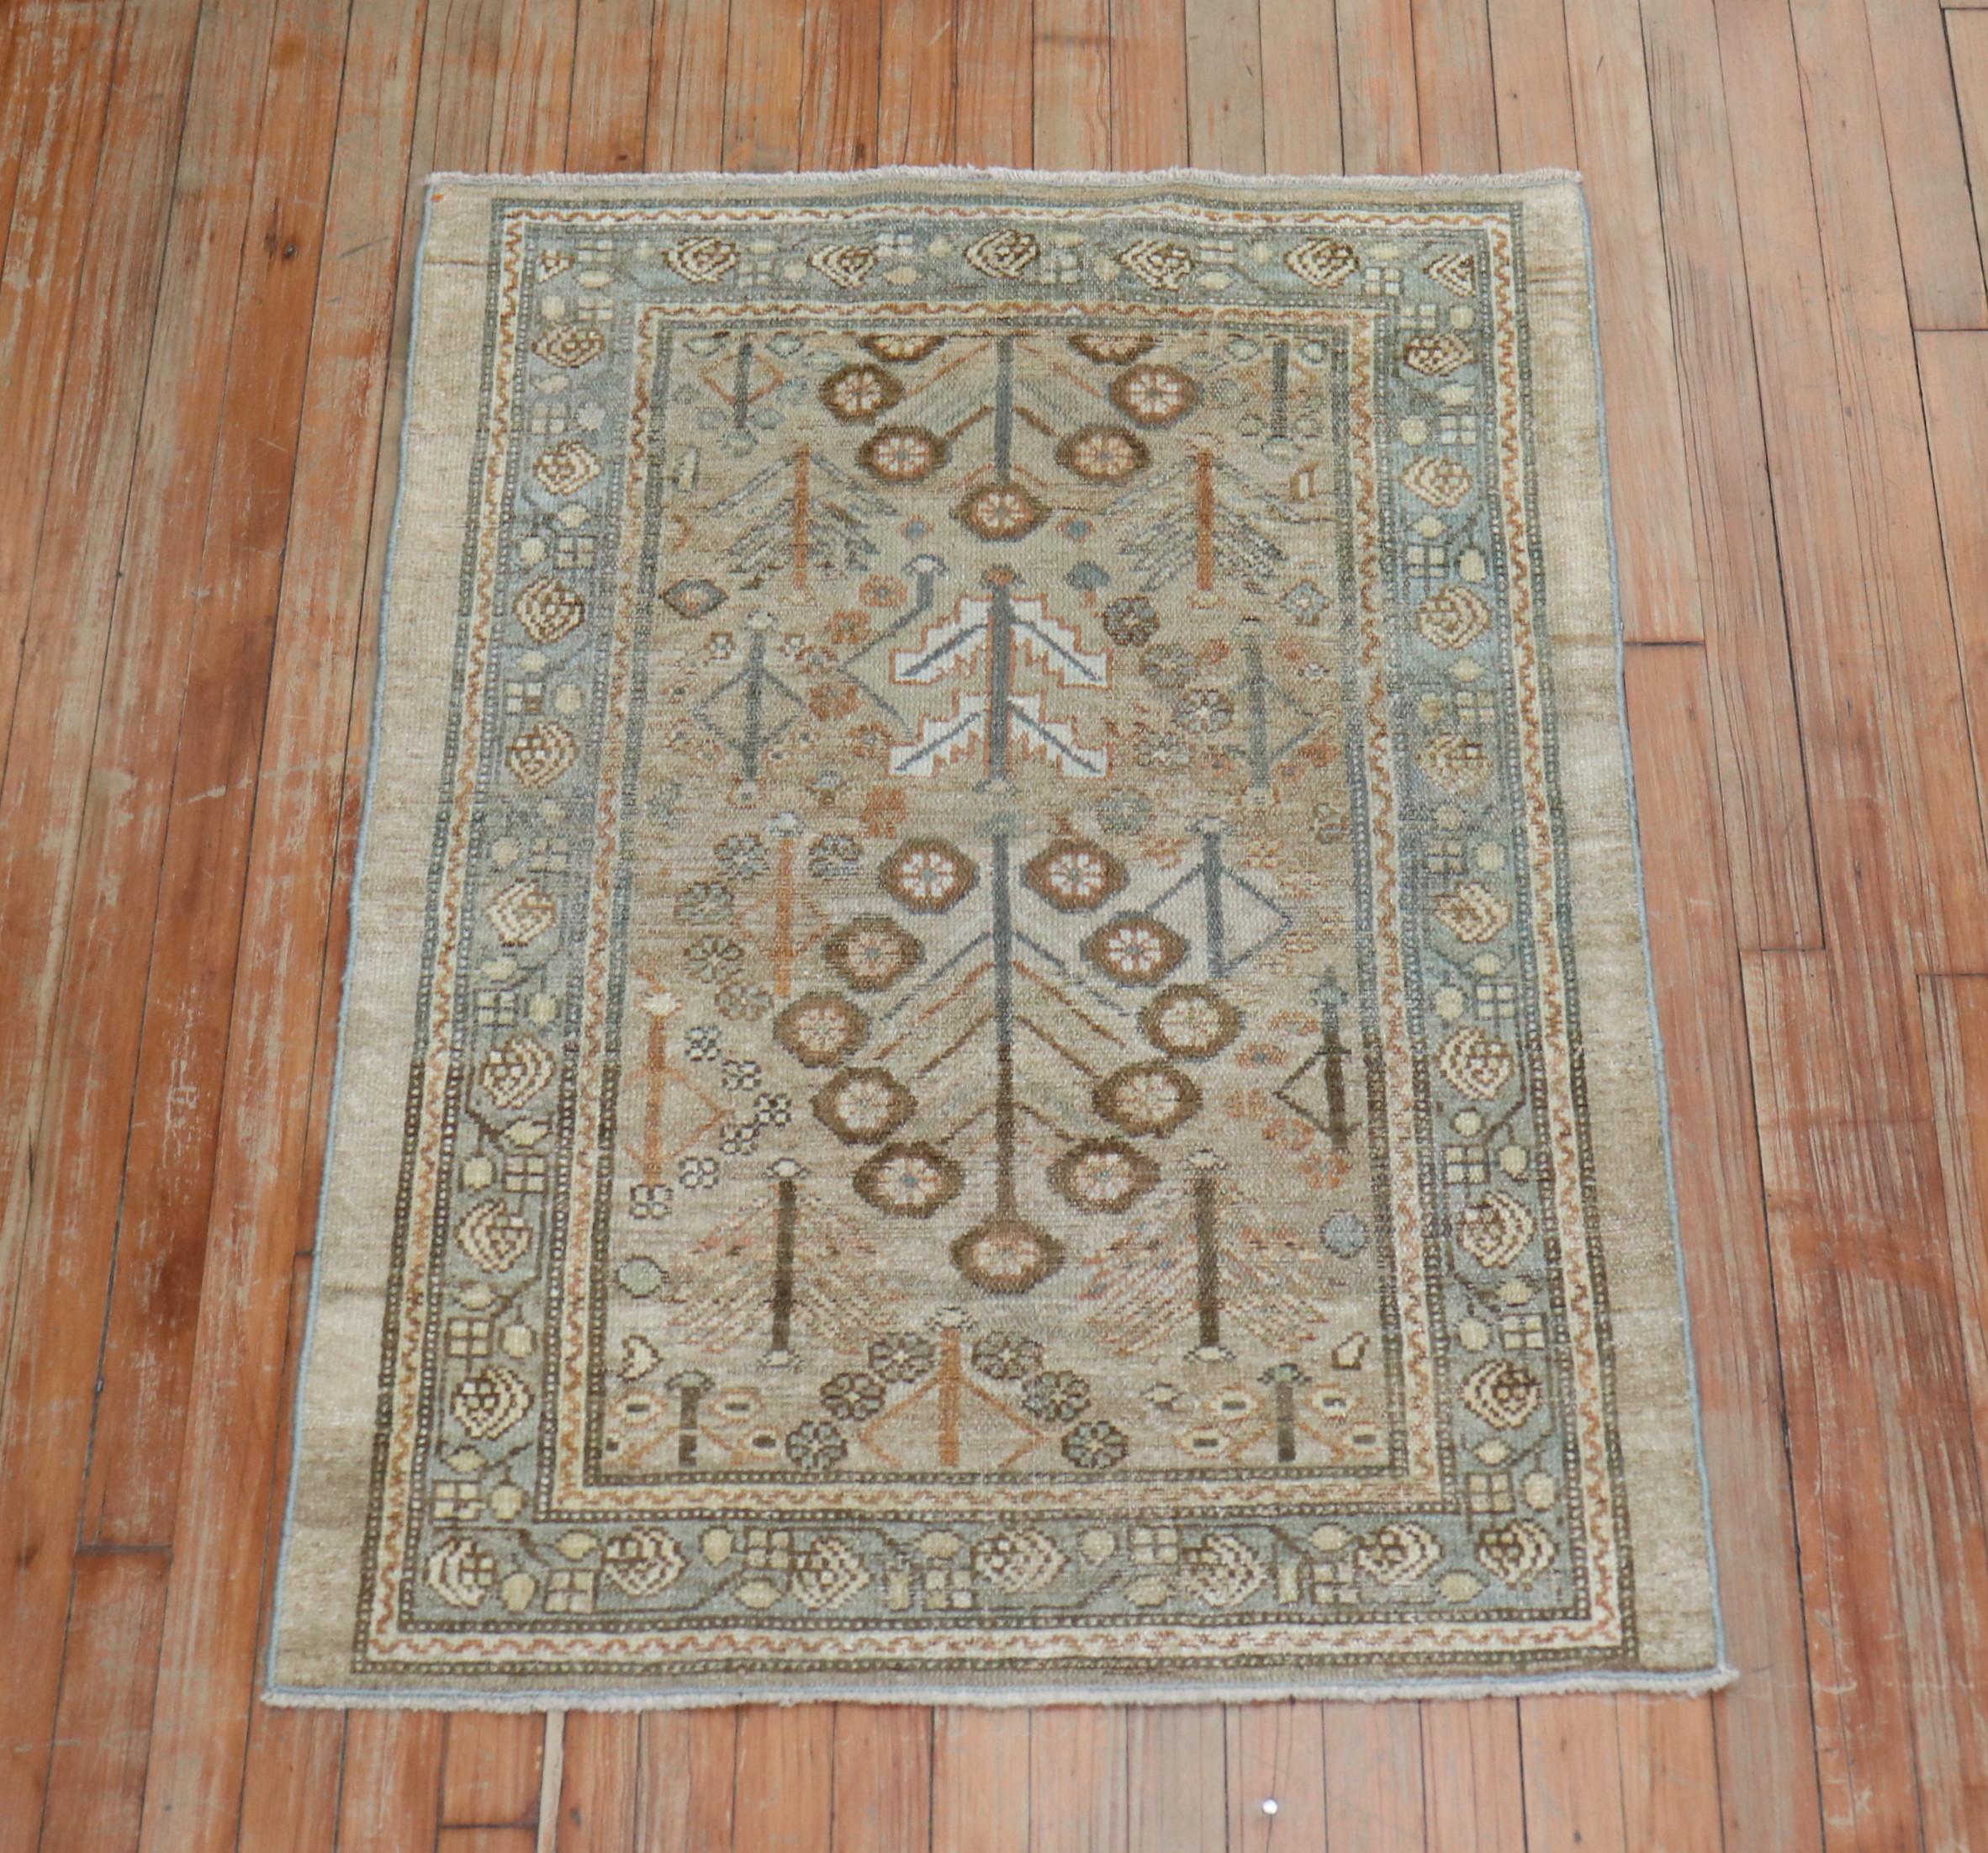 An early 20th century traditional Persian Serab mat in soft brown and sea foam accents on a camel ground

Measures: 2'10